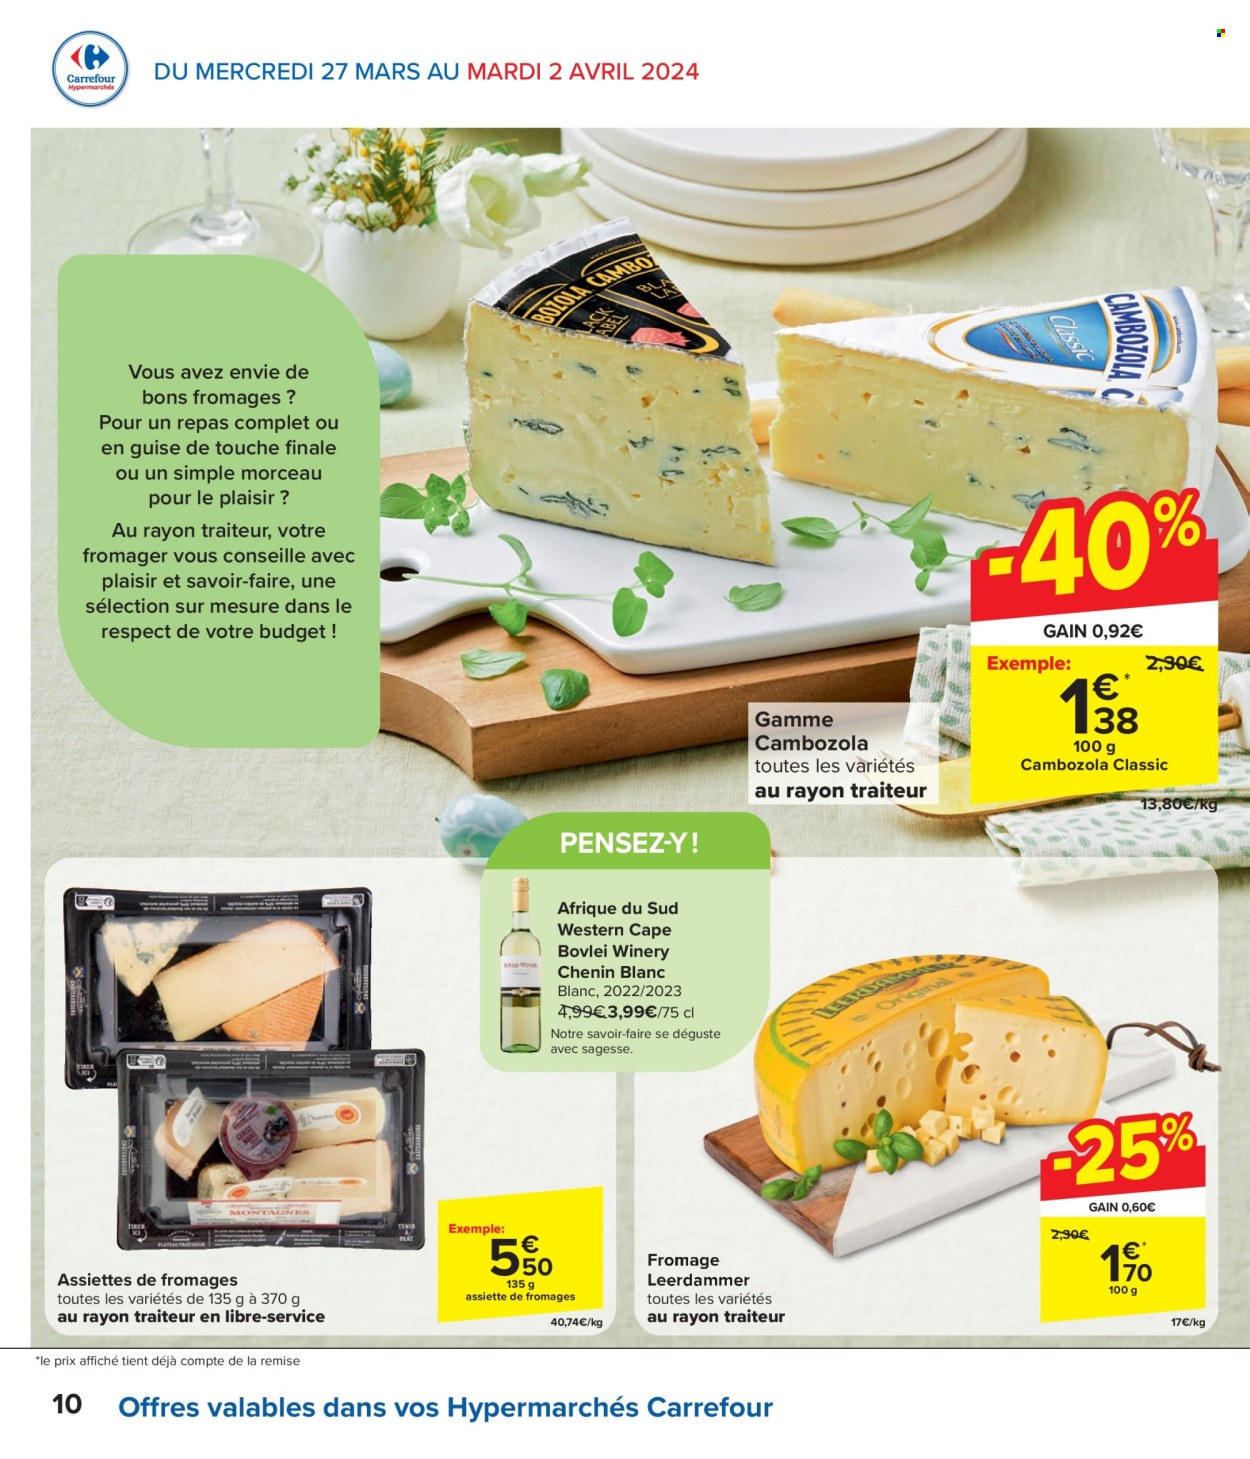 Catalogue Carrefour hypermarkt - 27.3.2024 - 8.4.2024. Page 10.